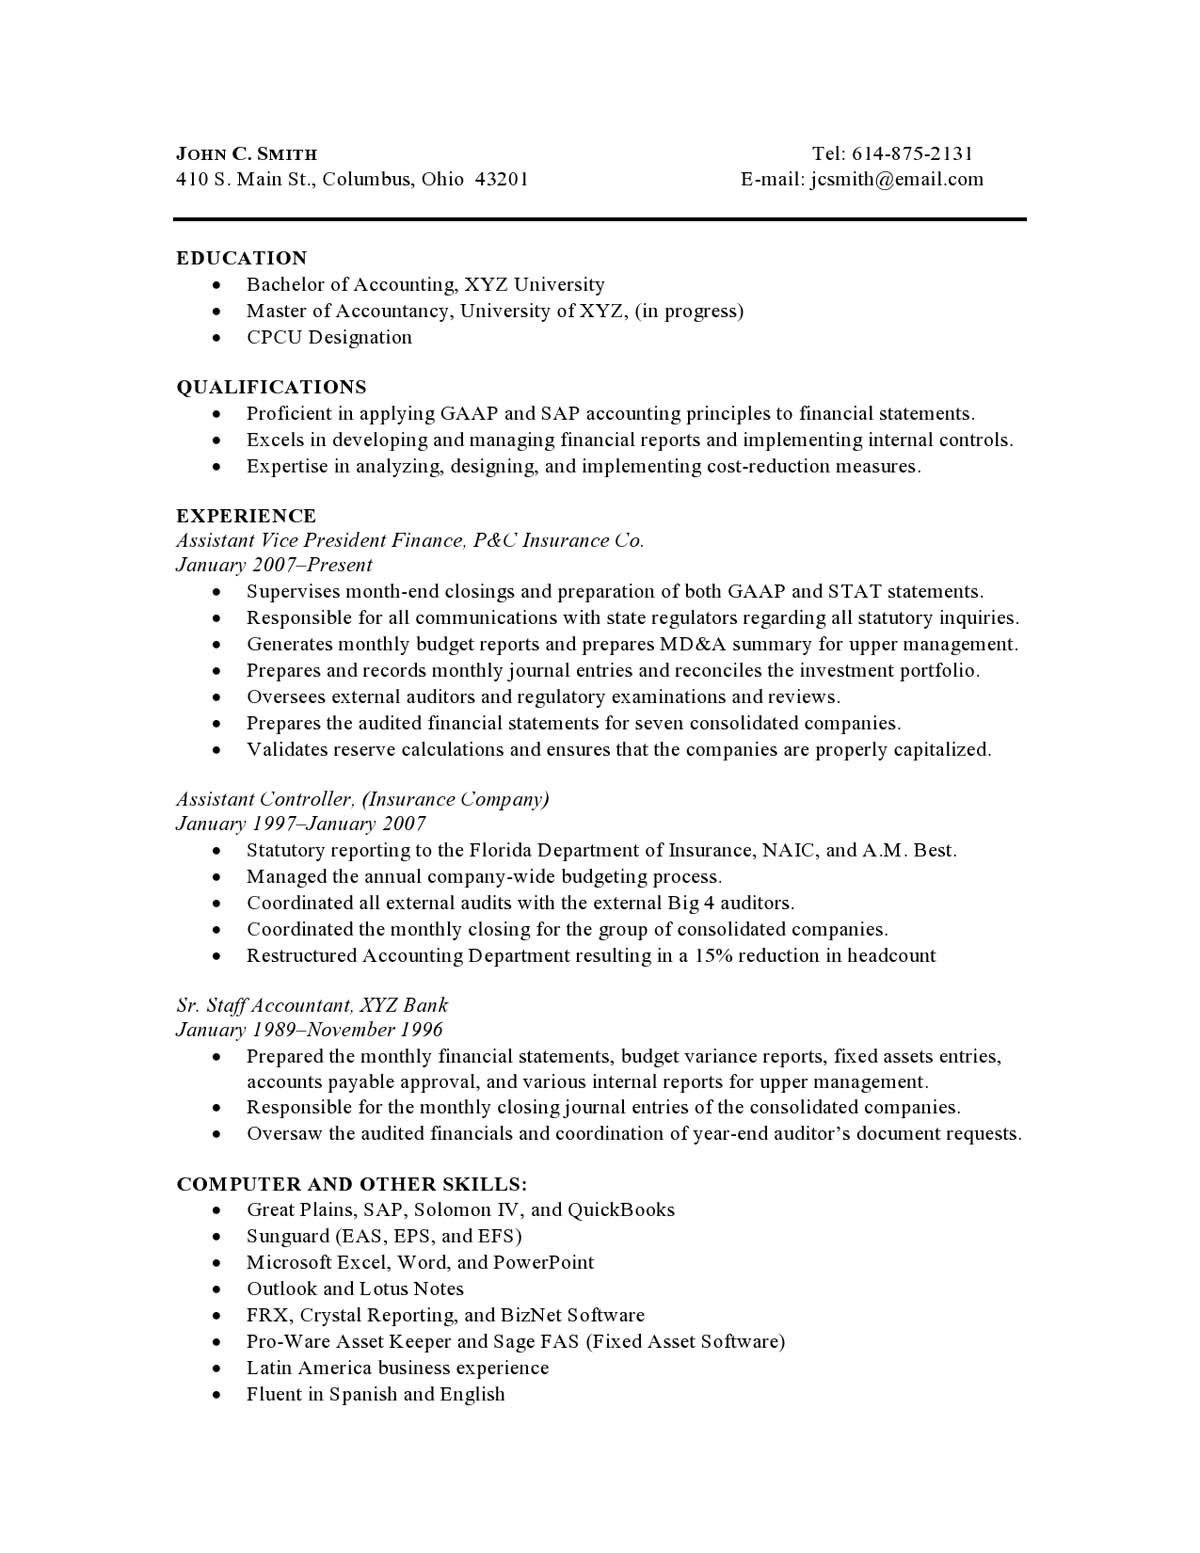 Help with Writing A Resume Sample Resume Samples Templates Examples Vault.com